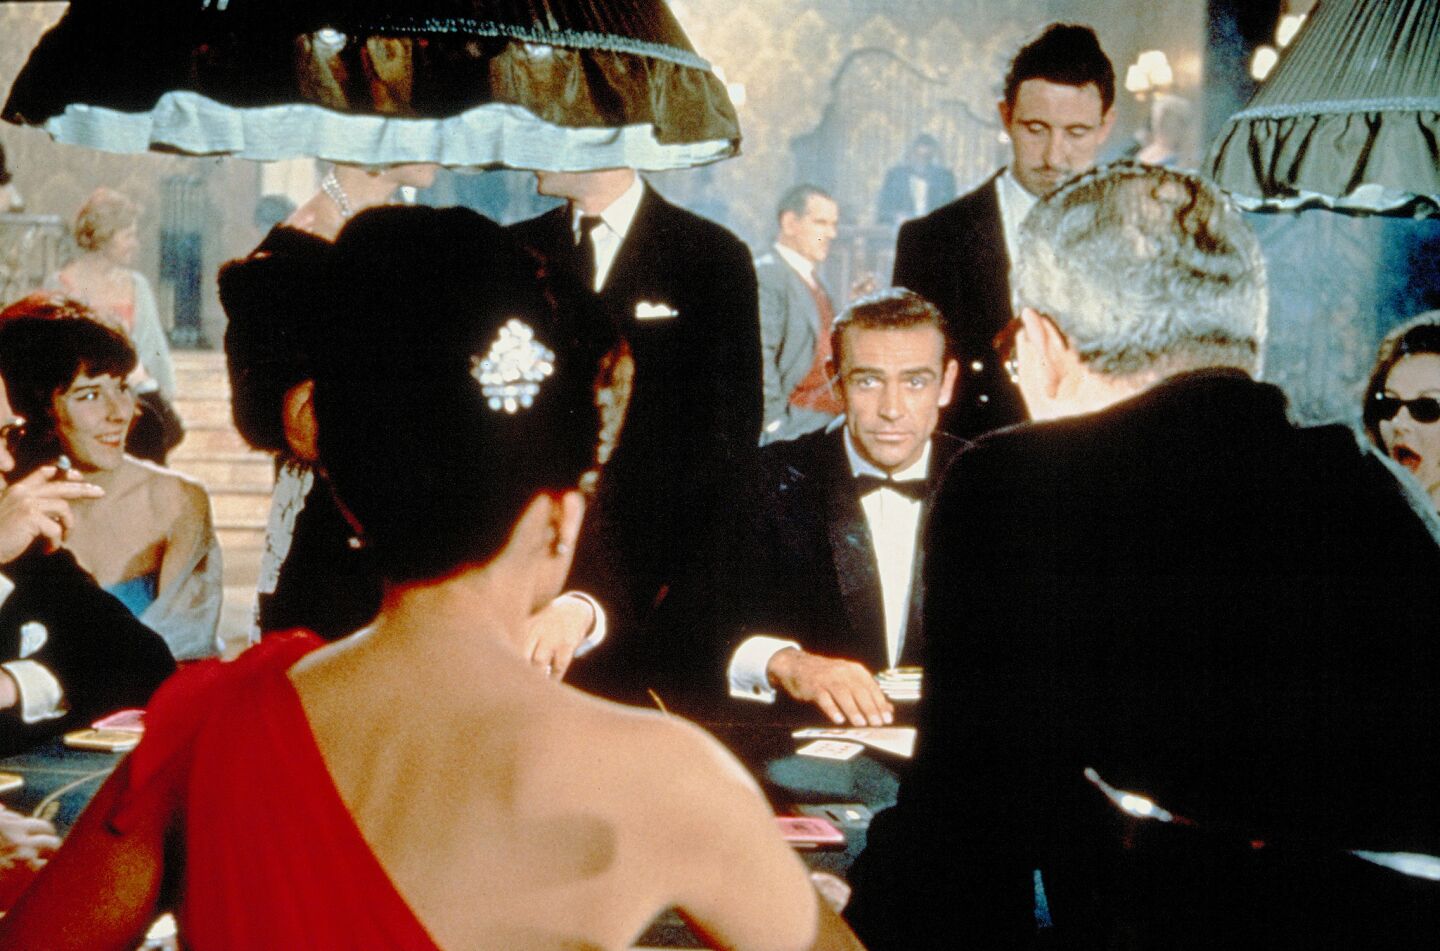 Connery made his breakthrough as James Bond in the 1962 film "Dr. No."